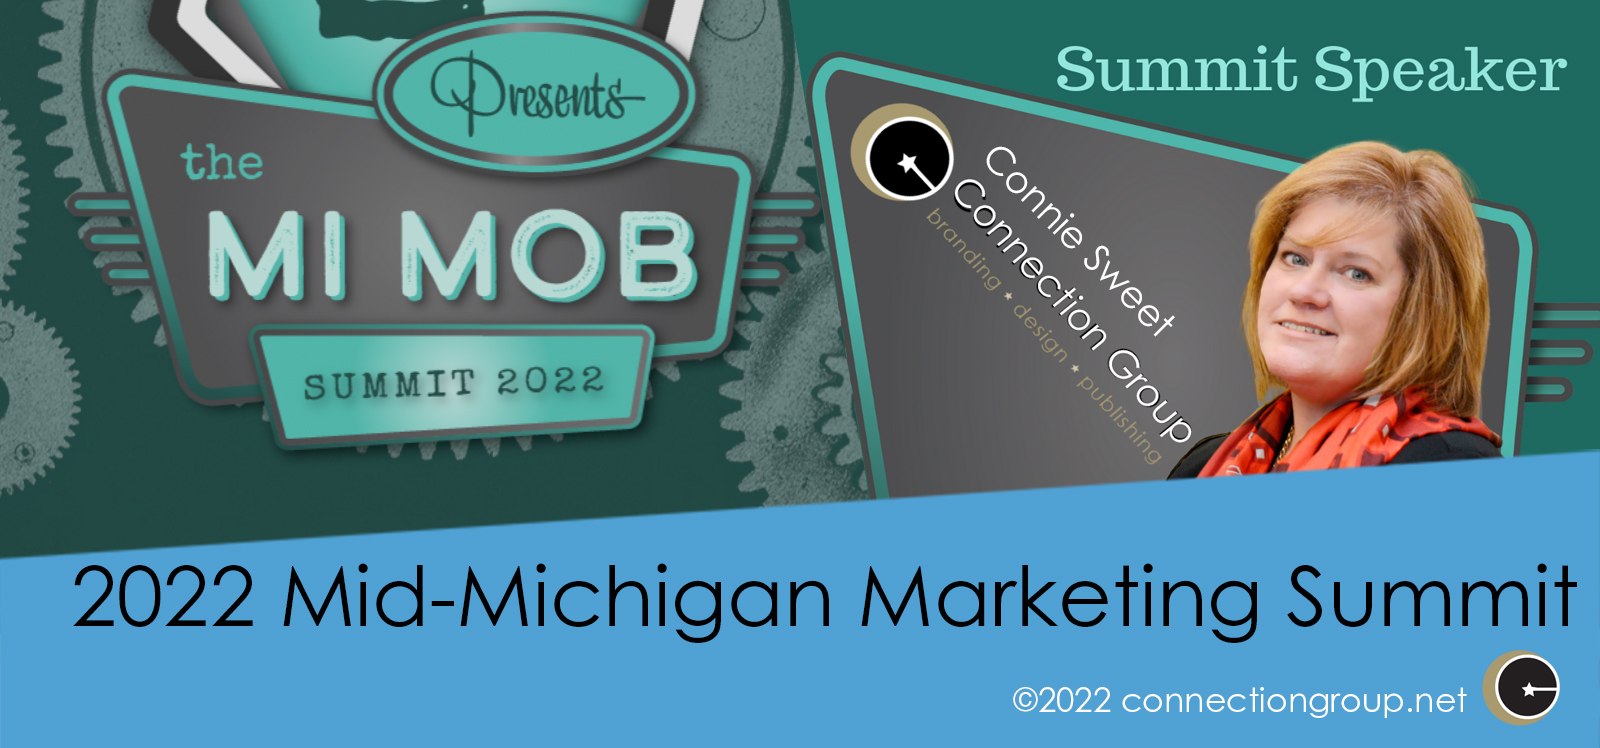 2022 Mid-Michigan Marketing summit Speaker Connie Sweet Connection Group